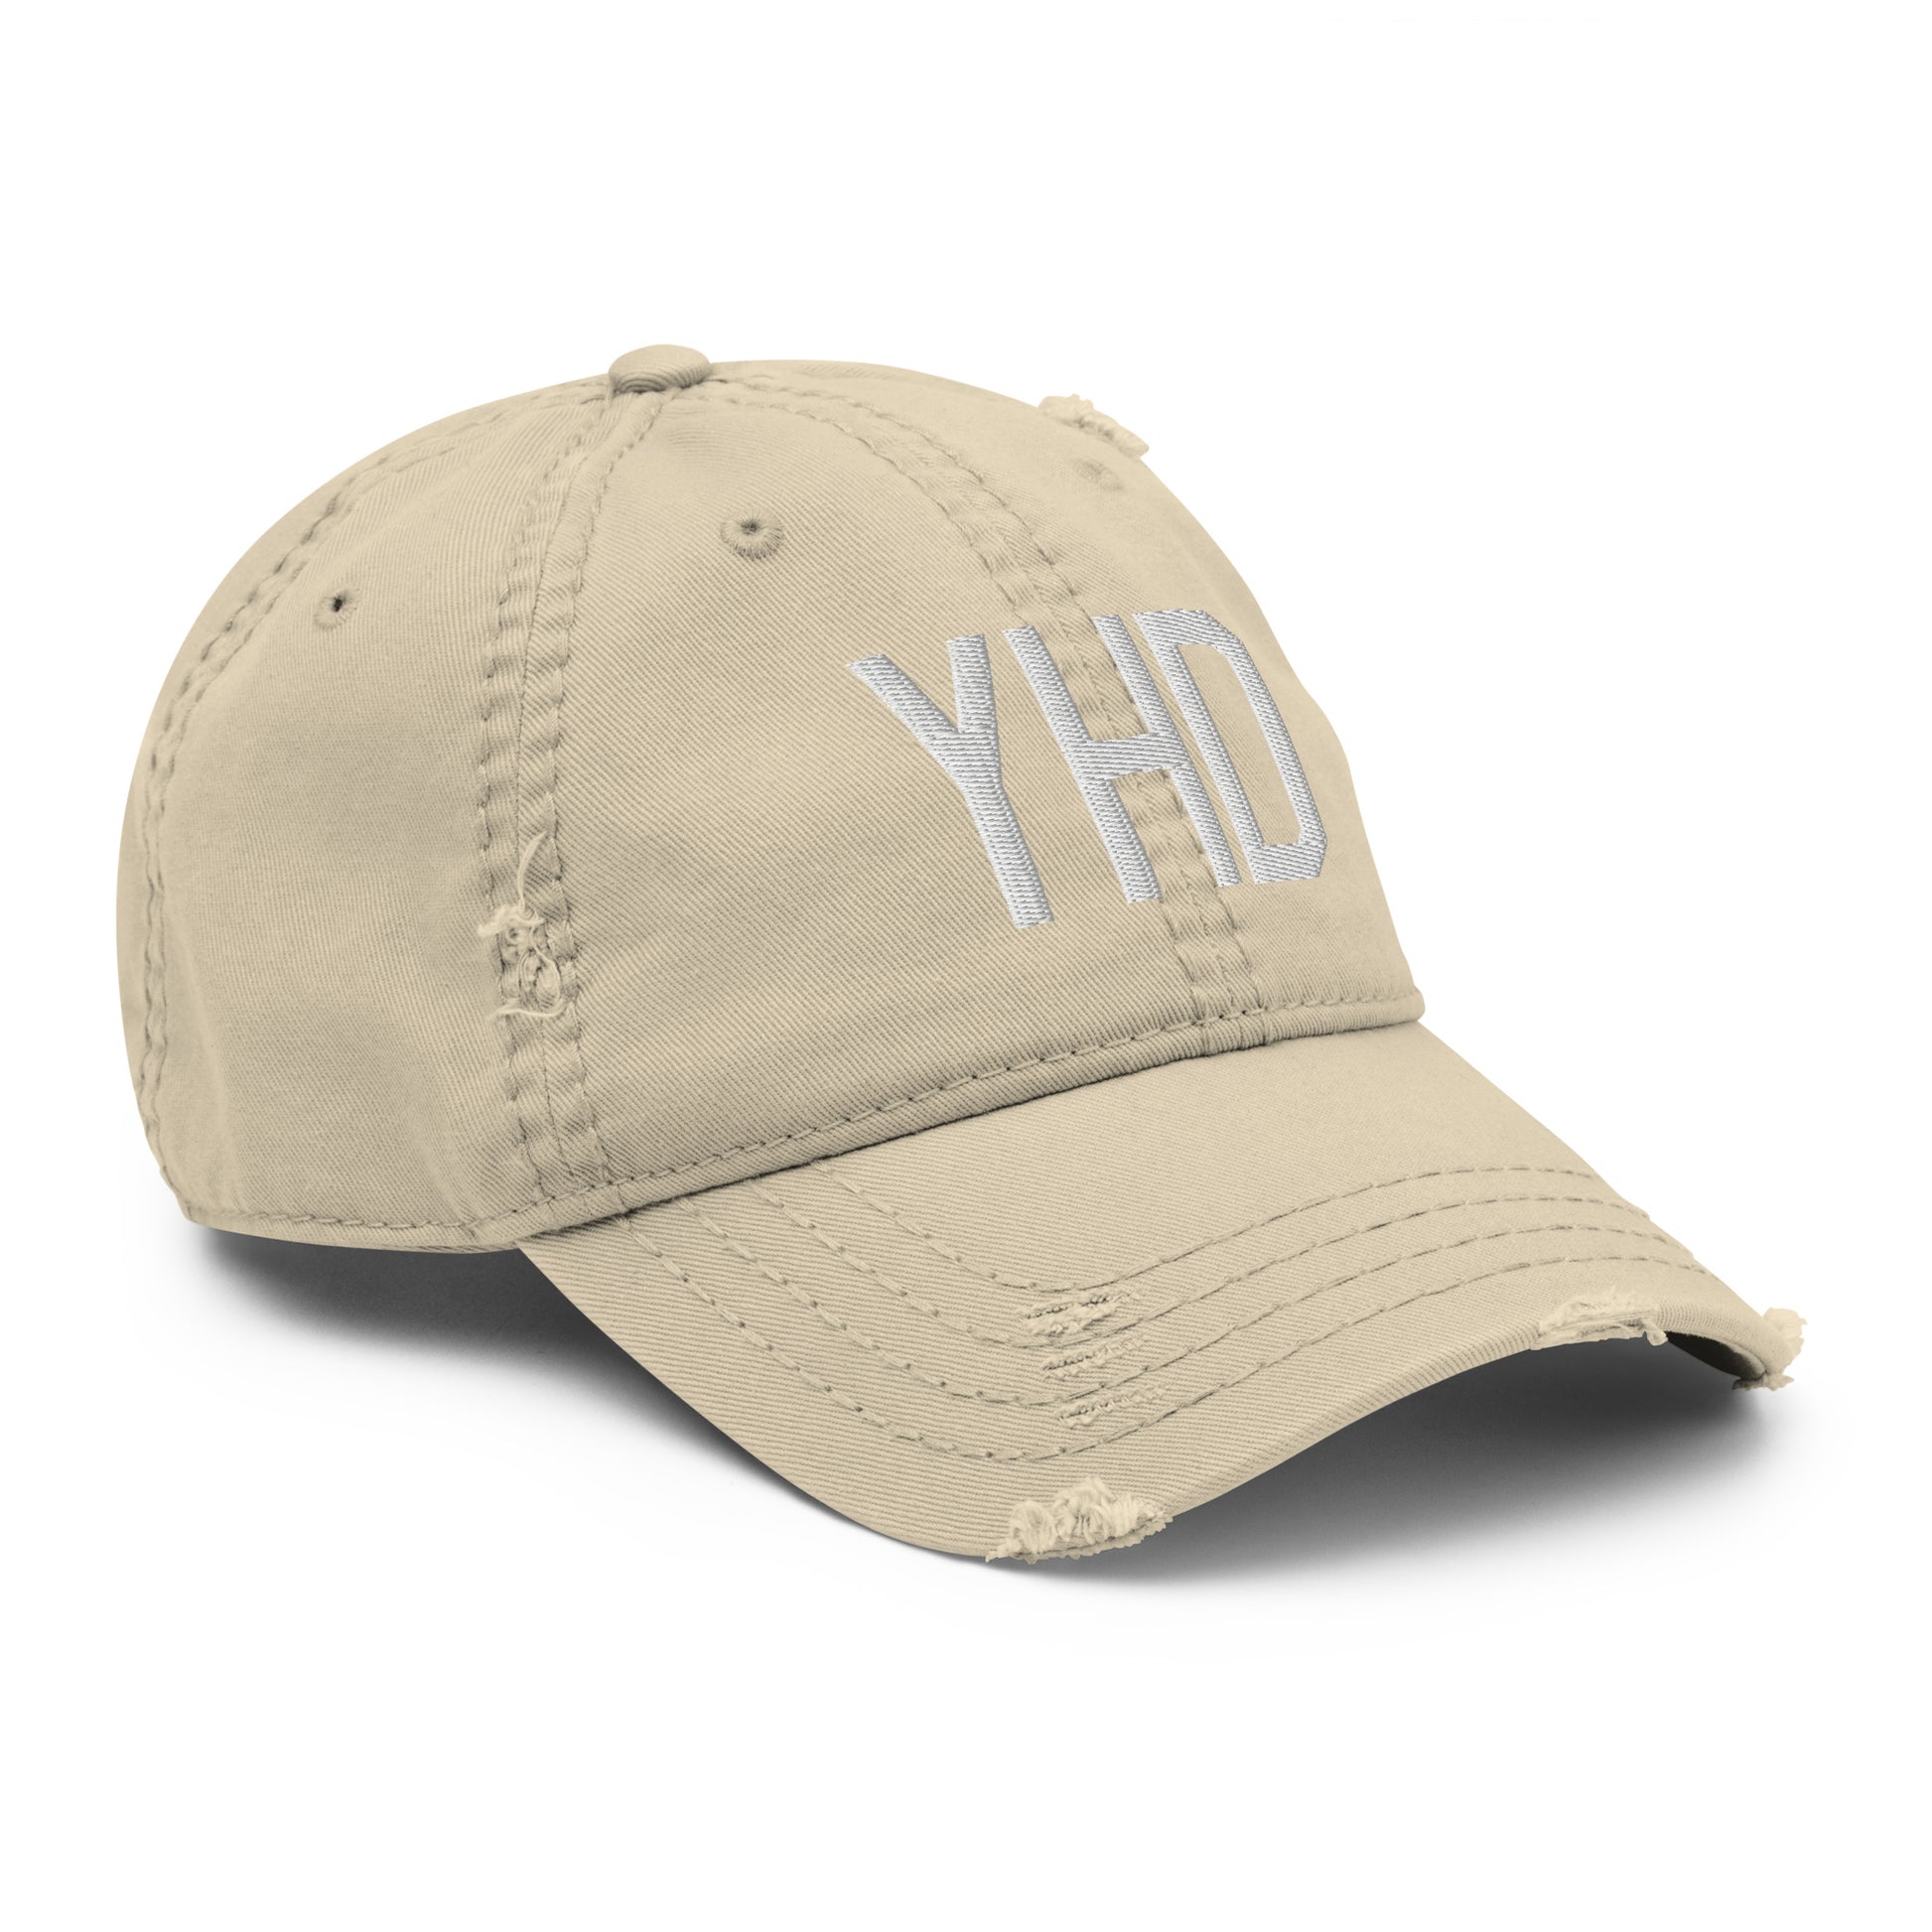 Airport Code Distressed Hat - White • YHD Dryden • YHM Designs - Image 20